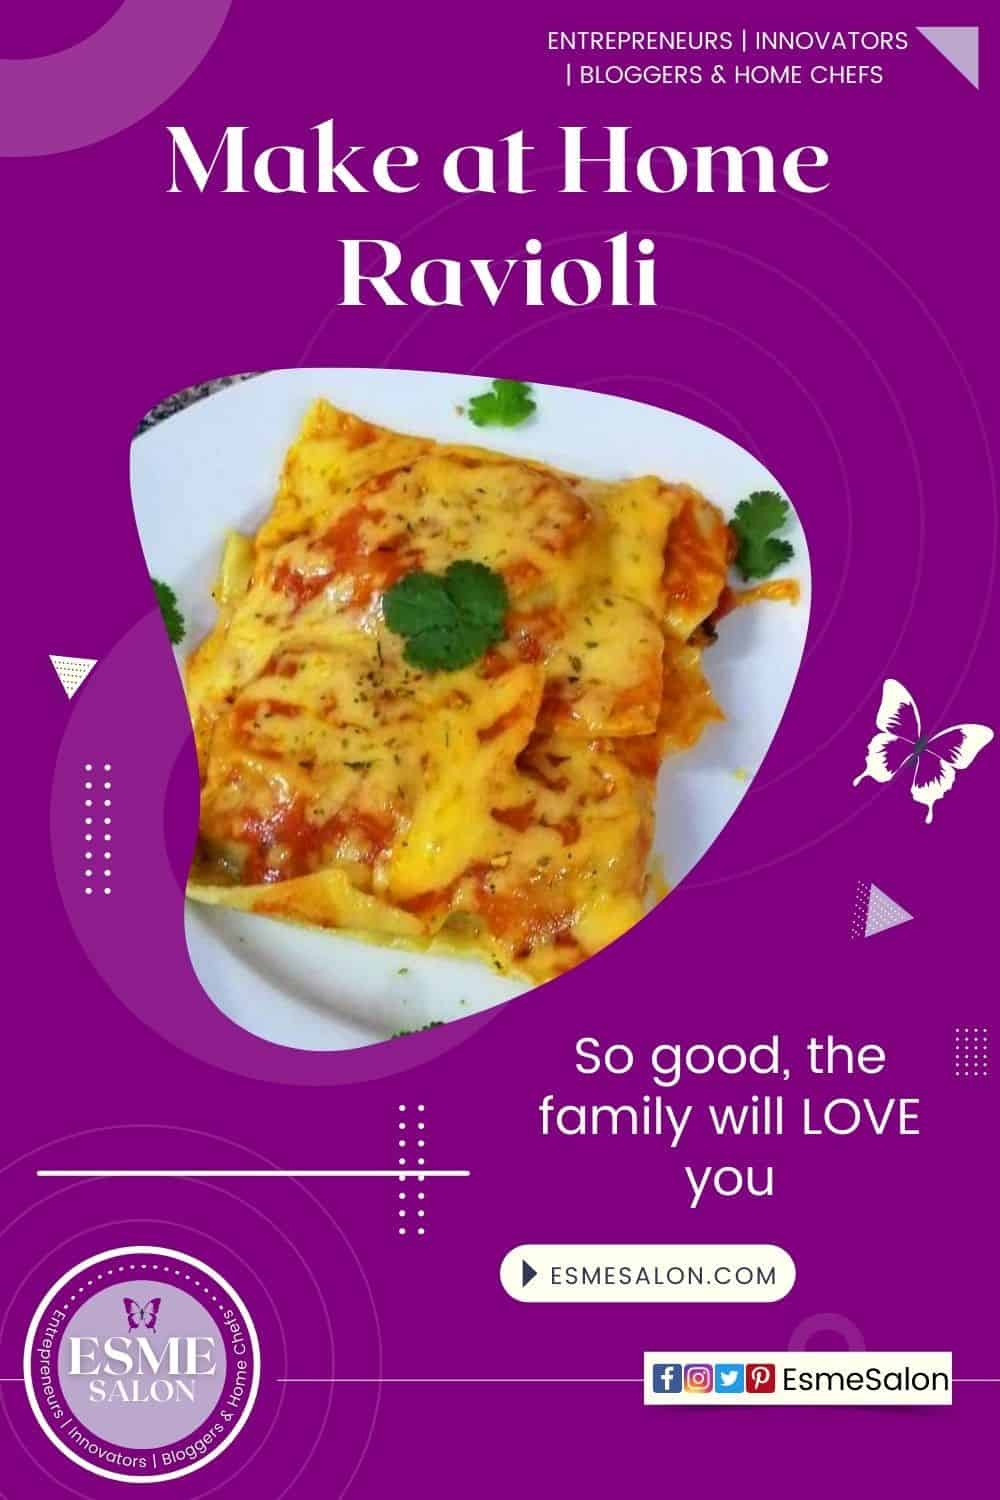 Home made - for sure the best and your family will love you so try it, and you will have them raving over this Ravioli